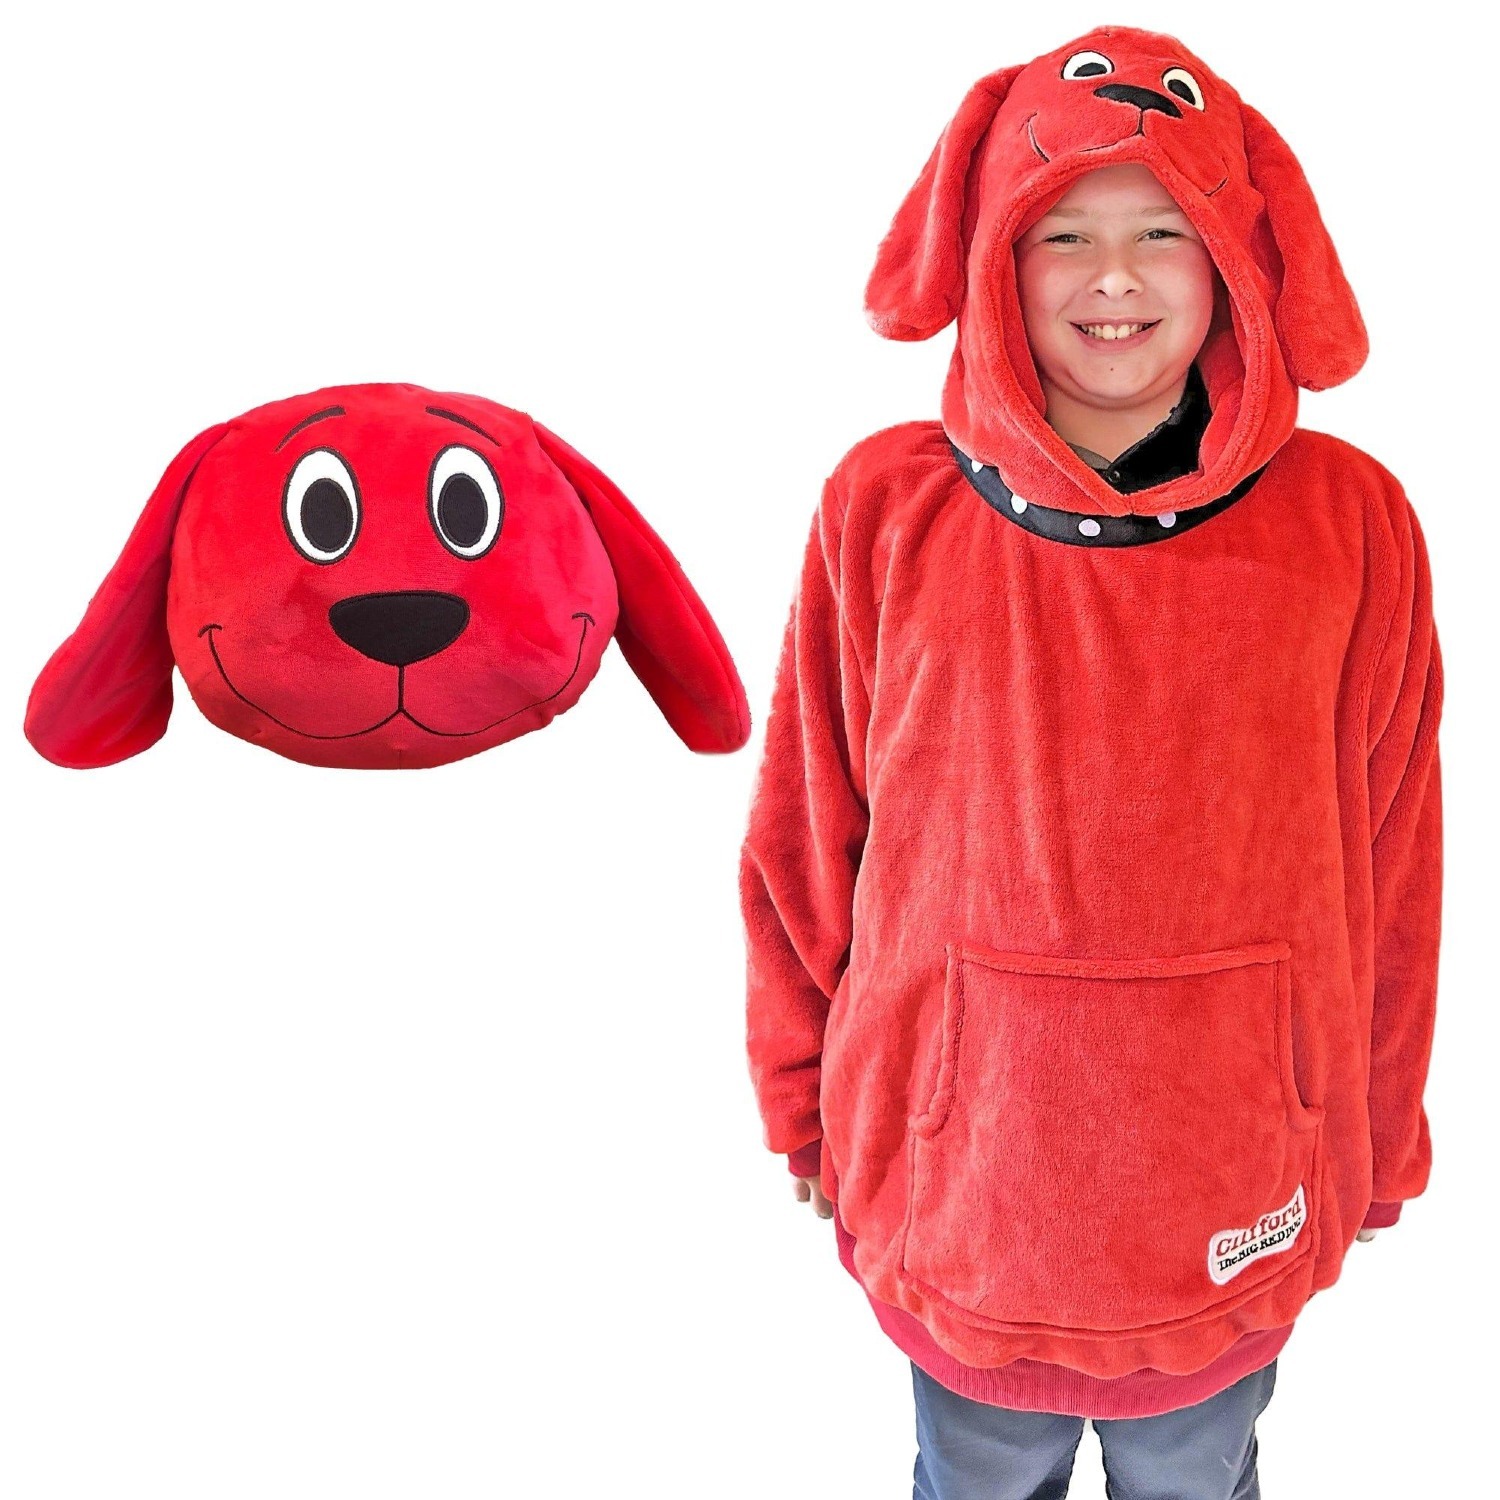 BOGO Kids 2-in-1 Plushible Hoodies: $50 for 2 Plushibles (Clifford, Bear & More) + Free Shipping